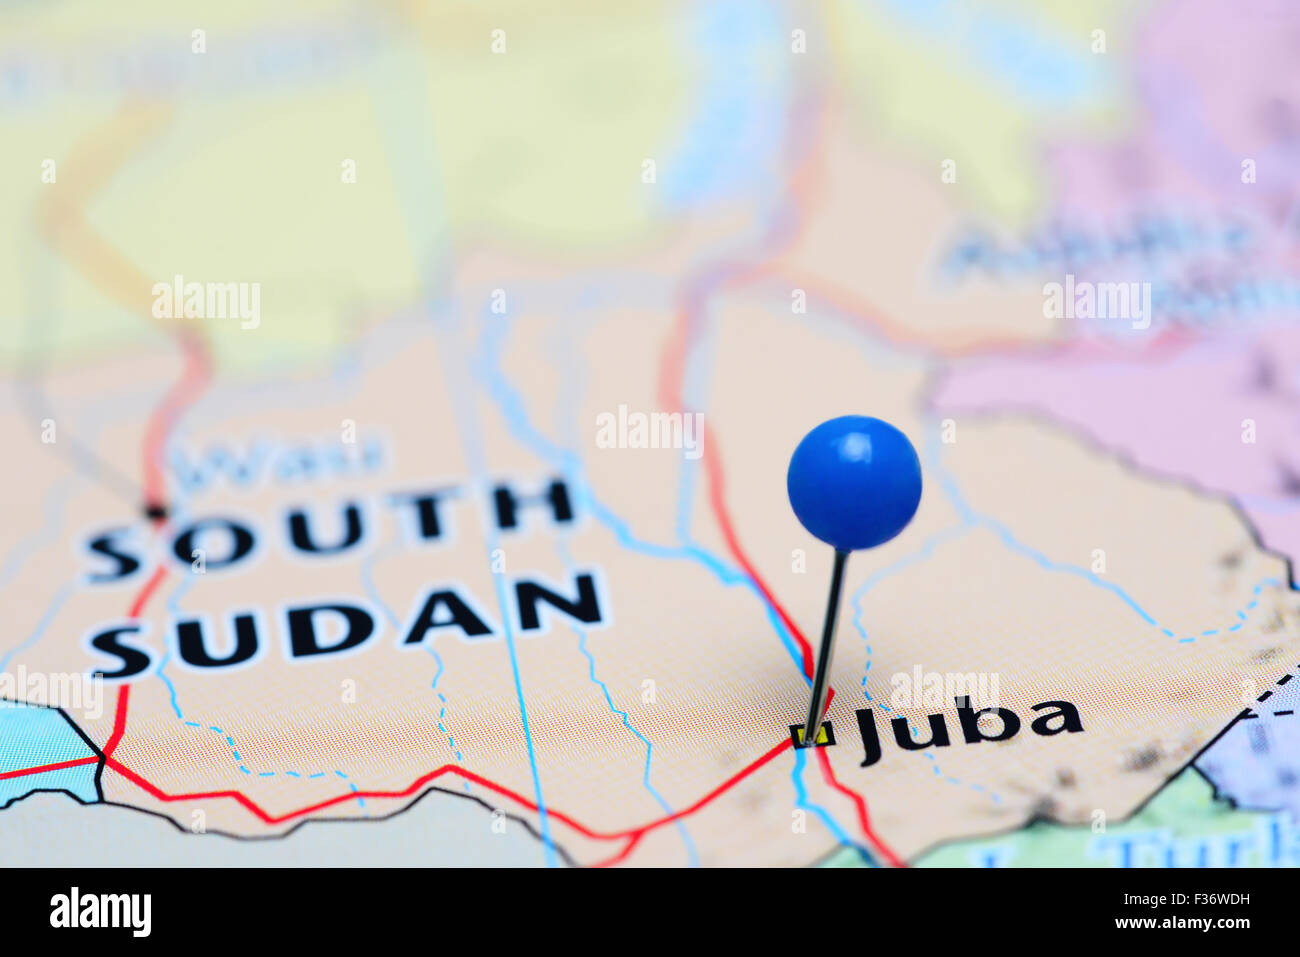 Juba pinned on a map of Asia Stock Photo